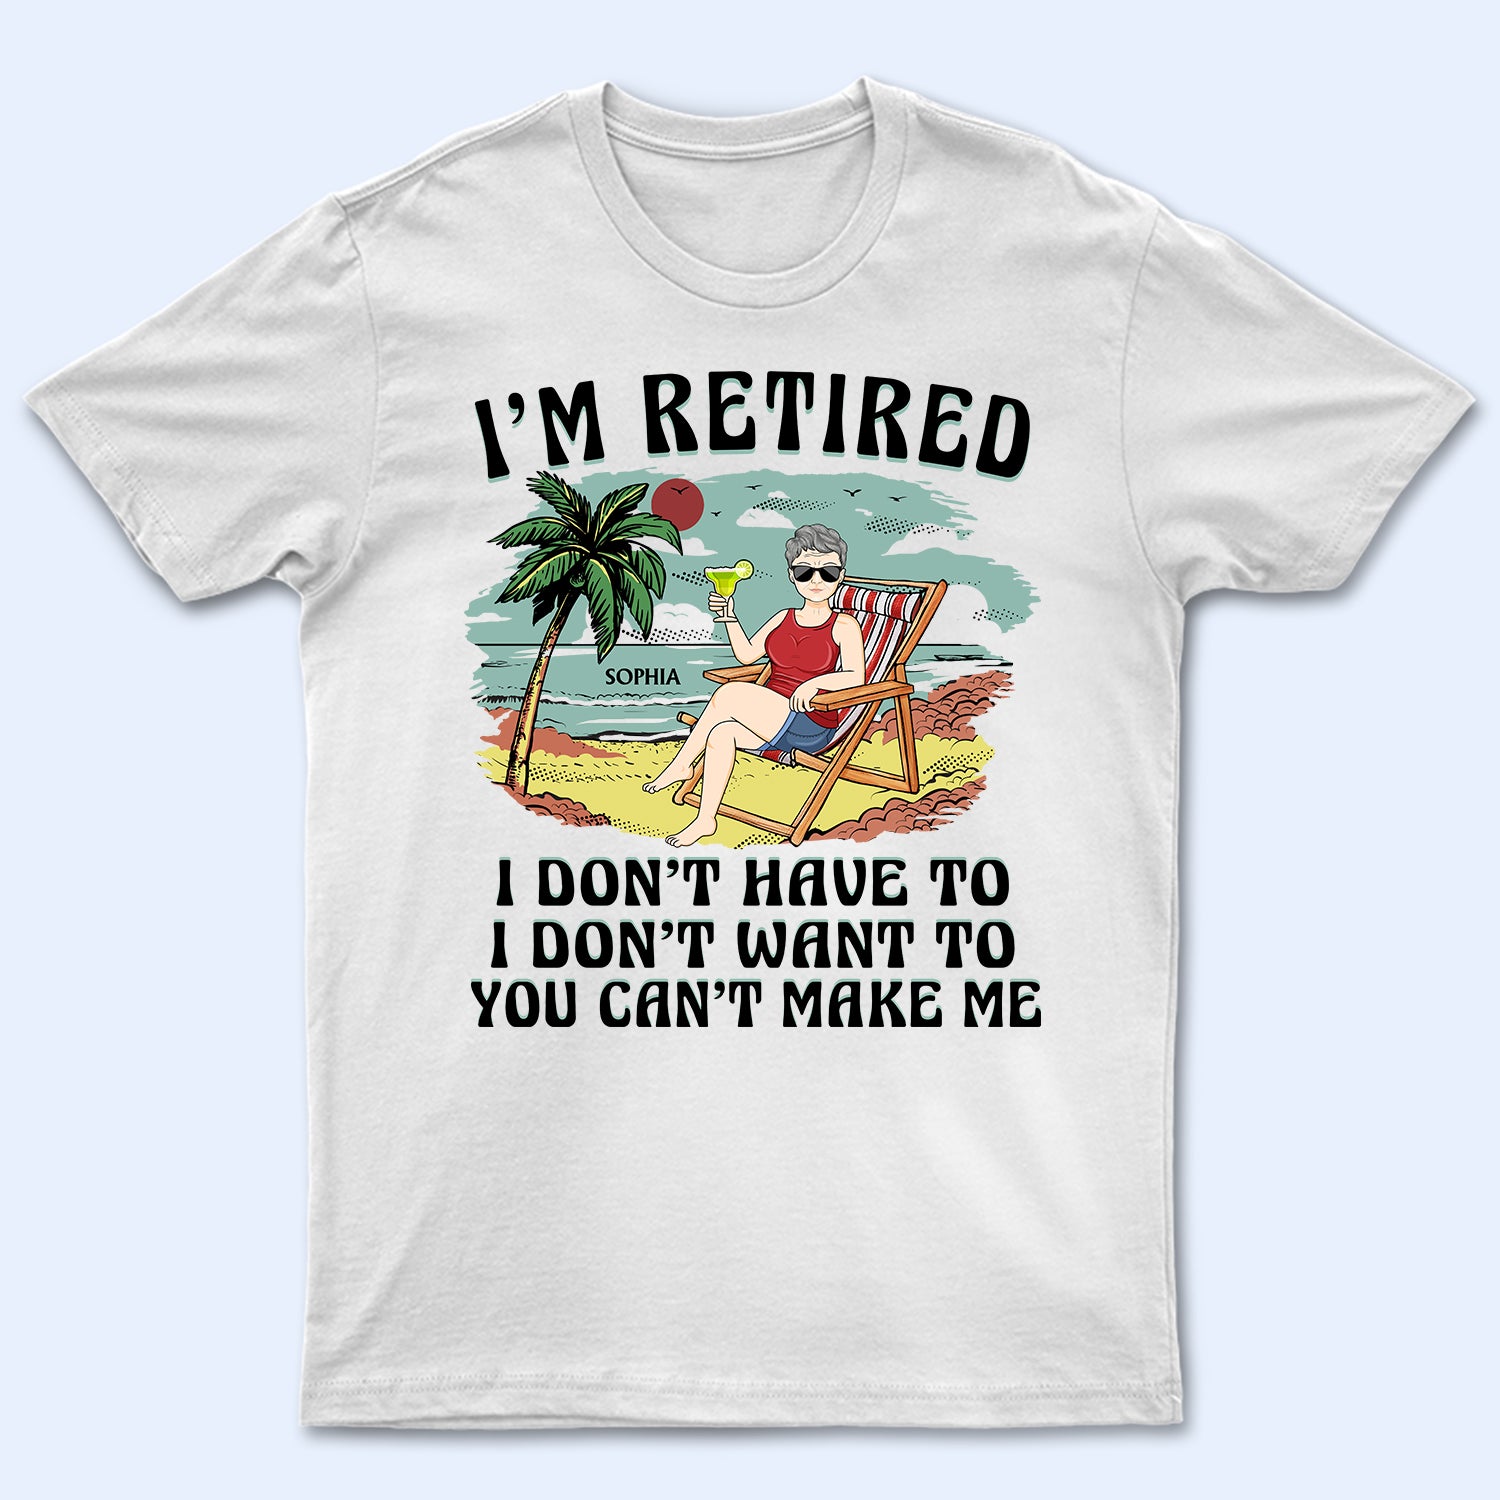 I'm Retired I Don't Want To Vintage - Retirement Gift For Beach Lovers, Dad, Mom, Grandpa, Grandma - Personalized T Shirt